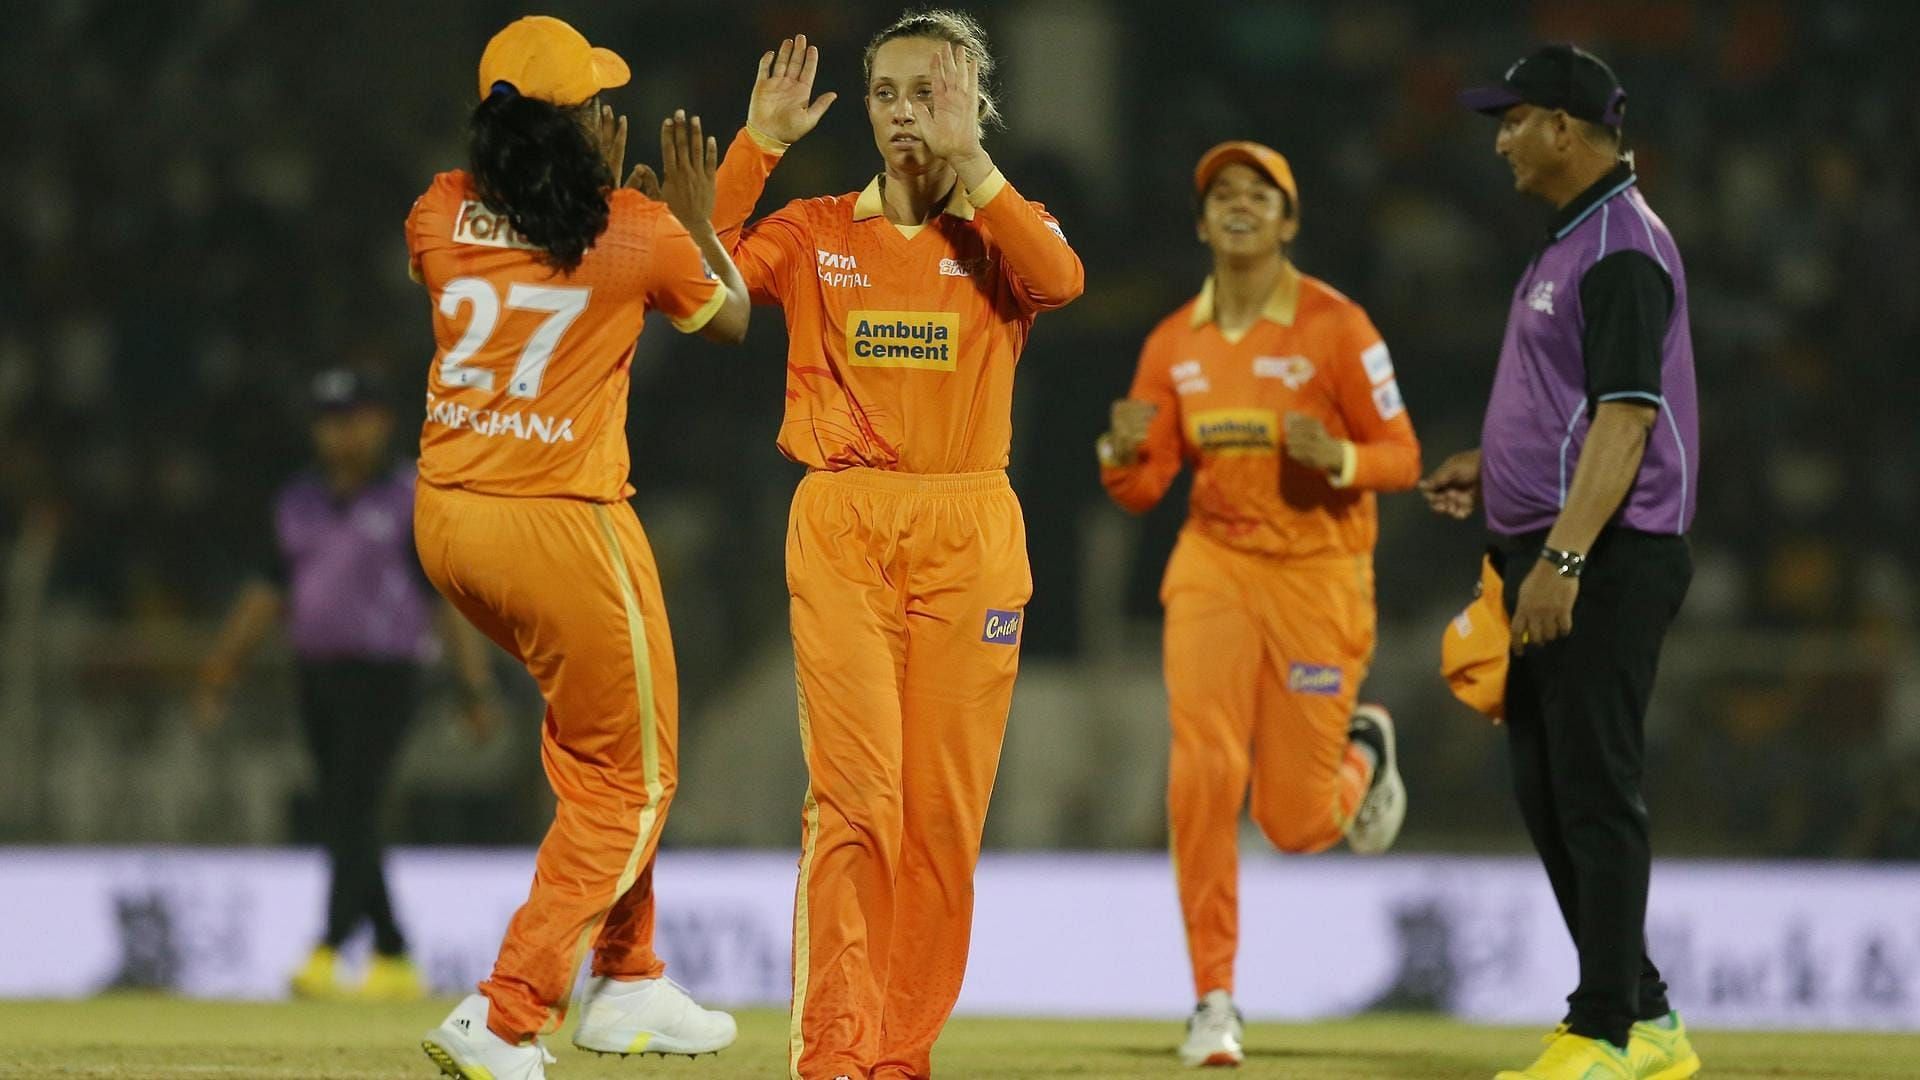 Can the Gujarat Giants register back-to-back victories?